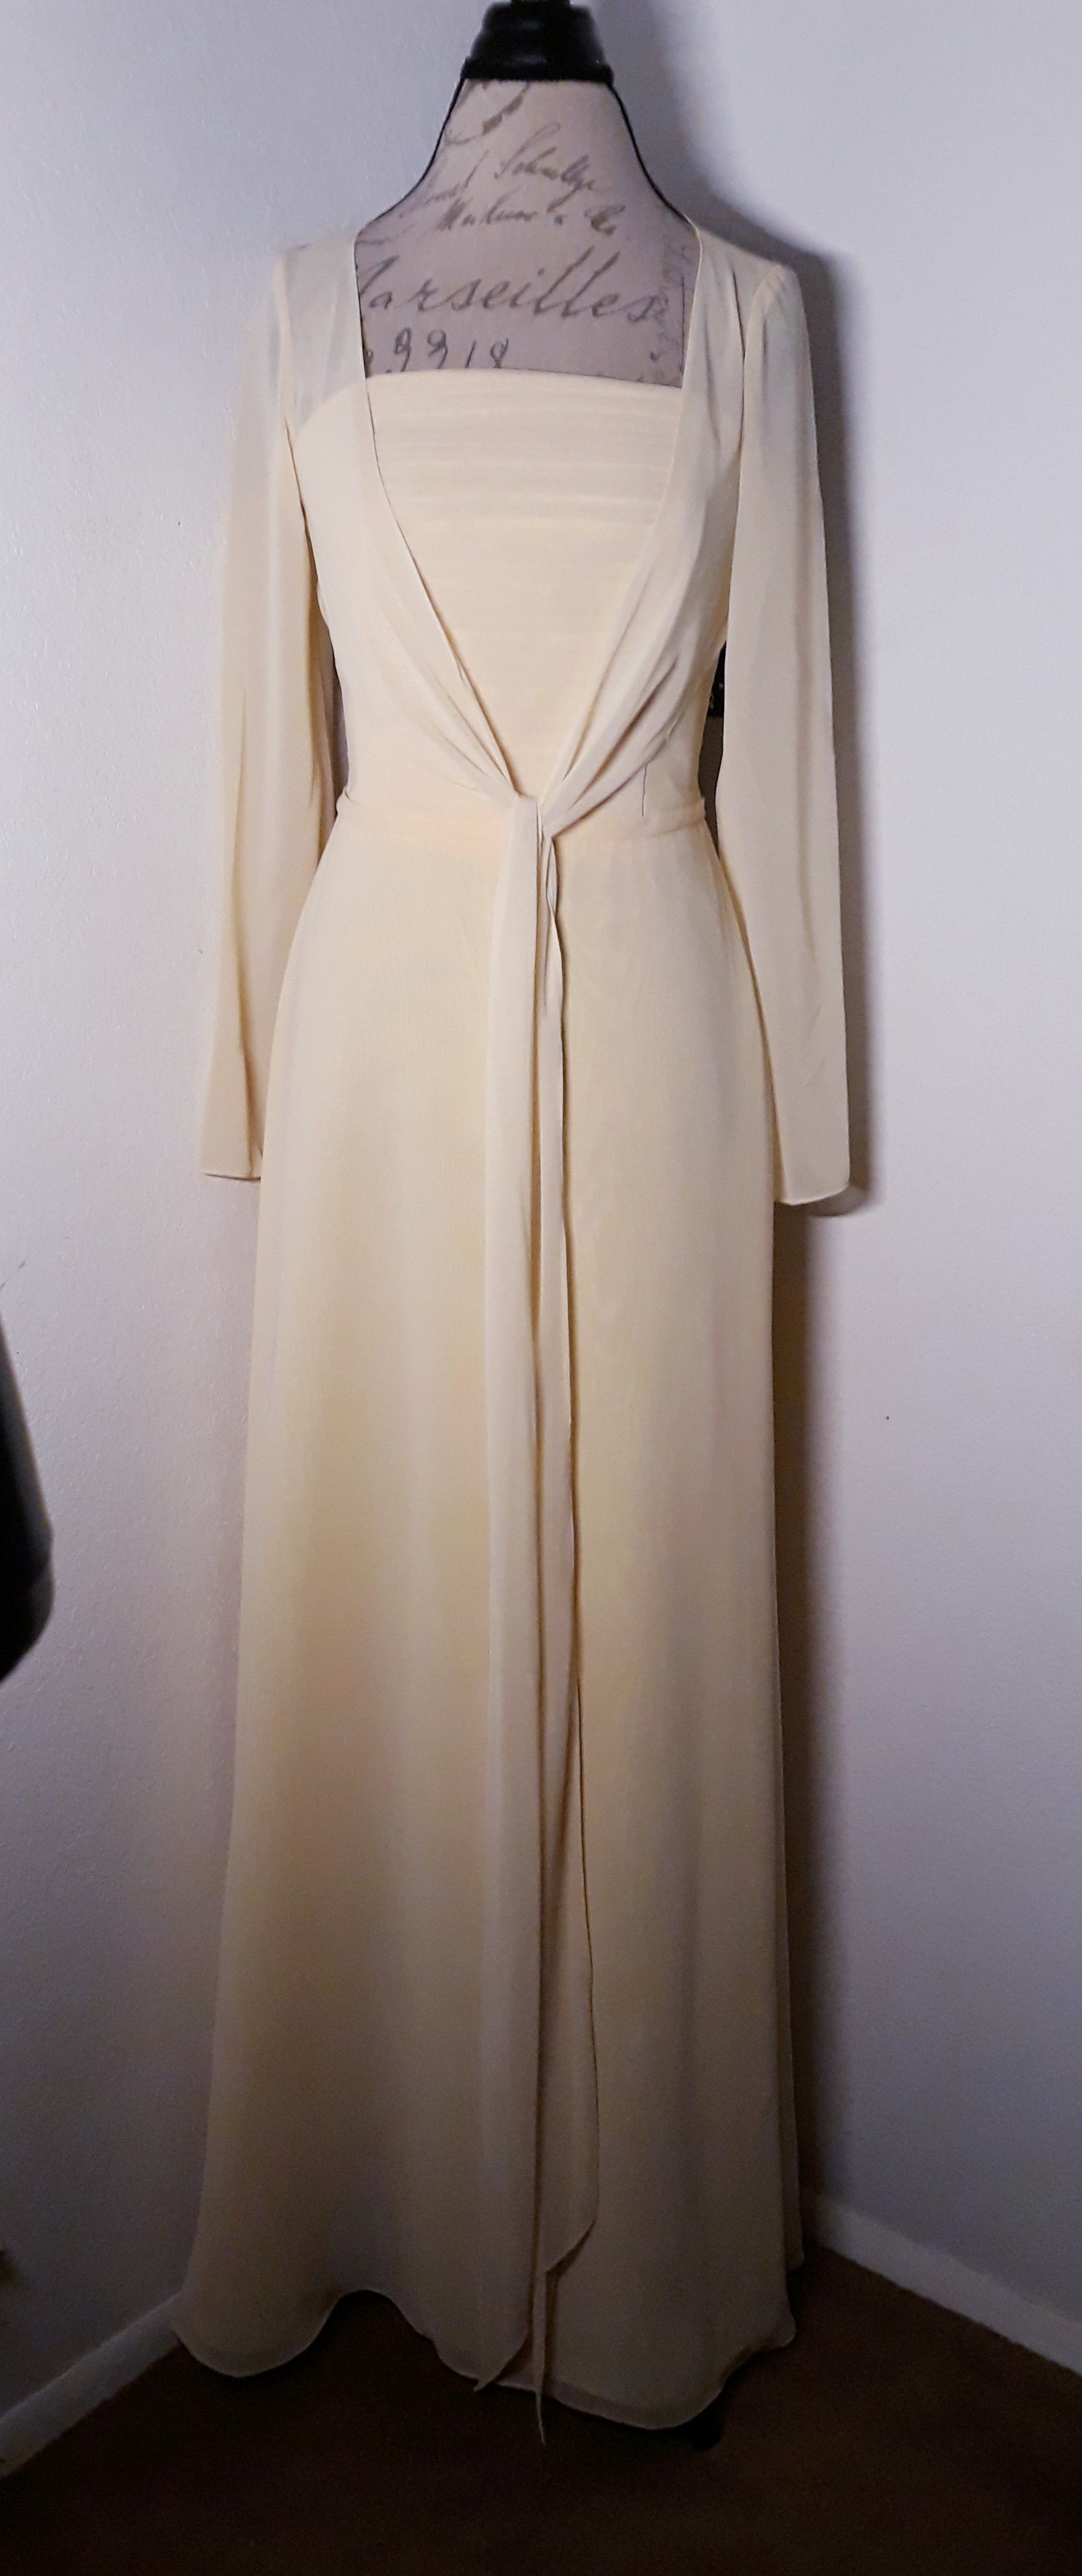 Pale Yellow Strapless Formal Dress Eith Sheer Cover Up Sz 12